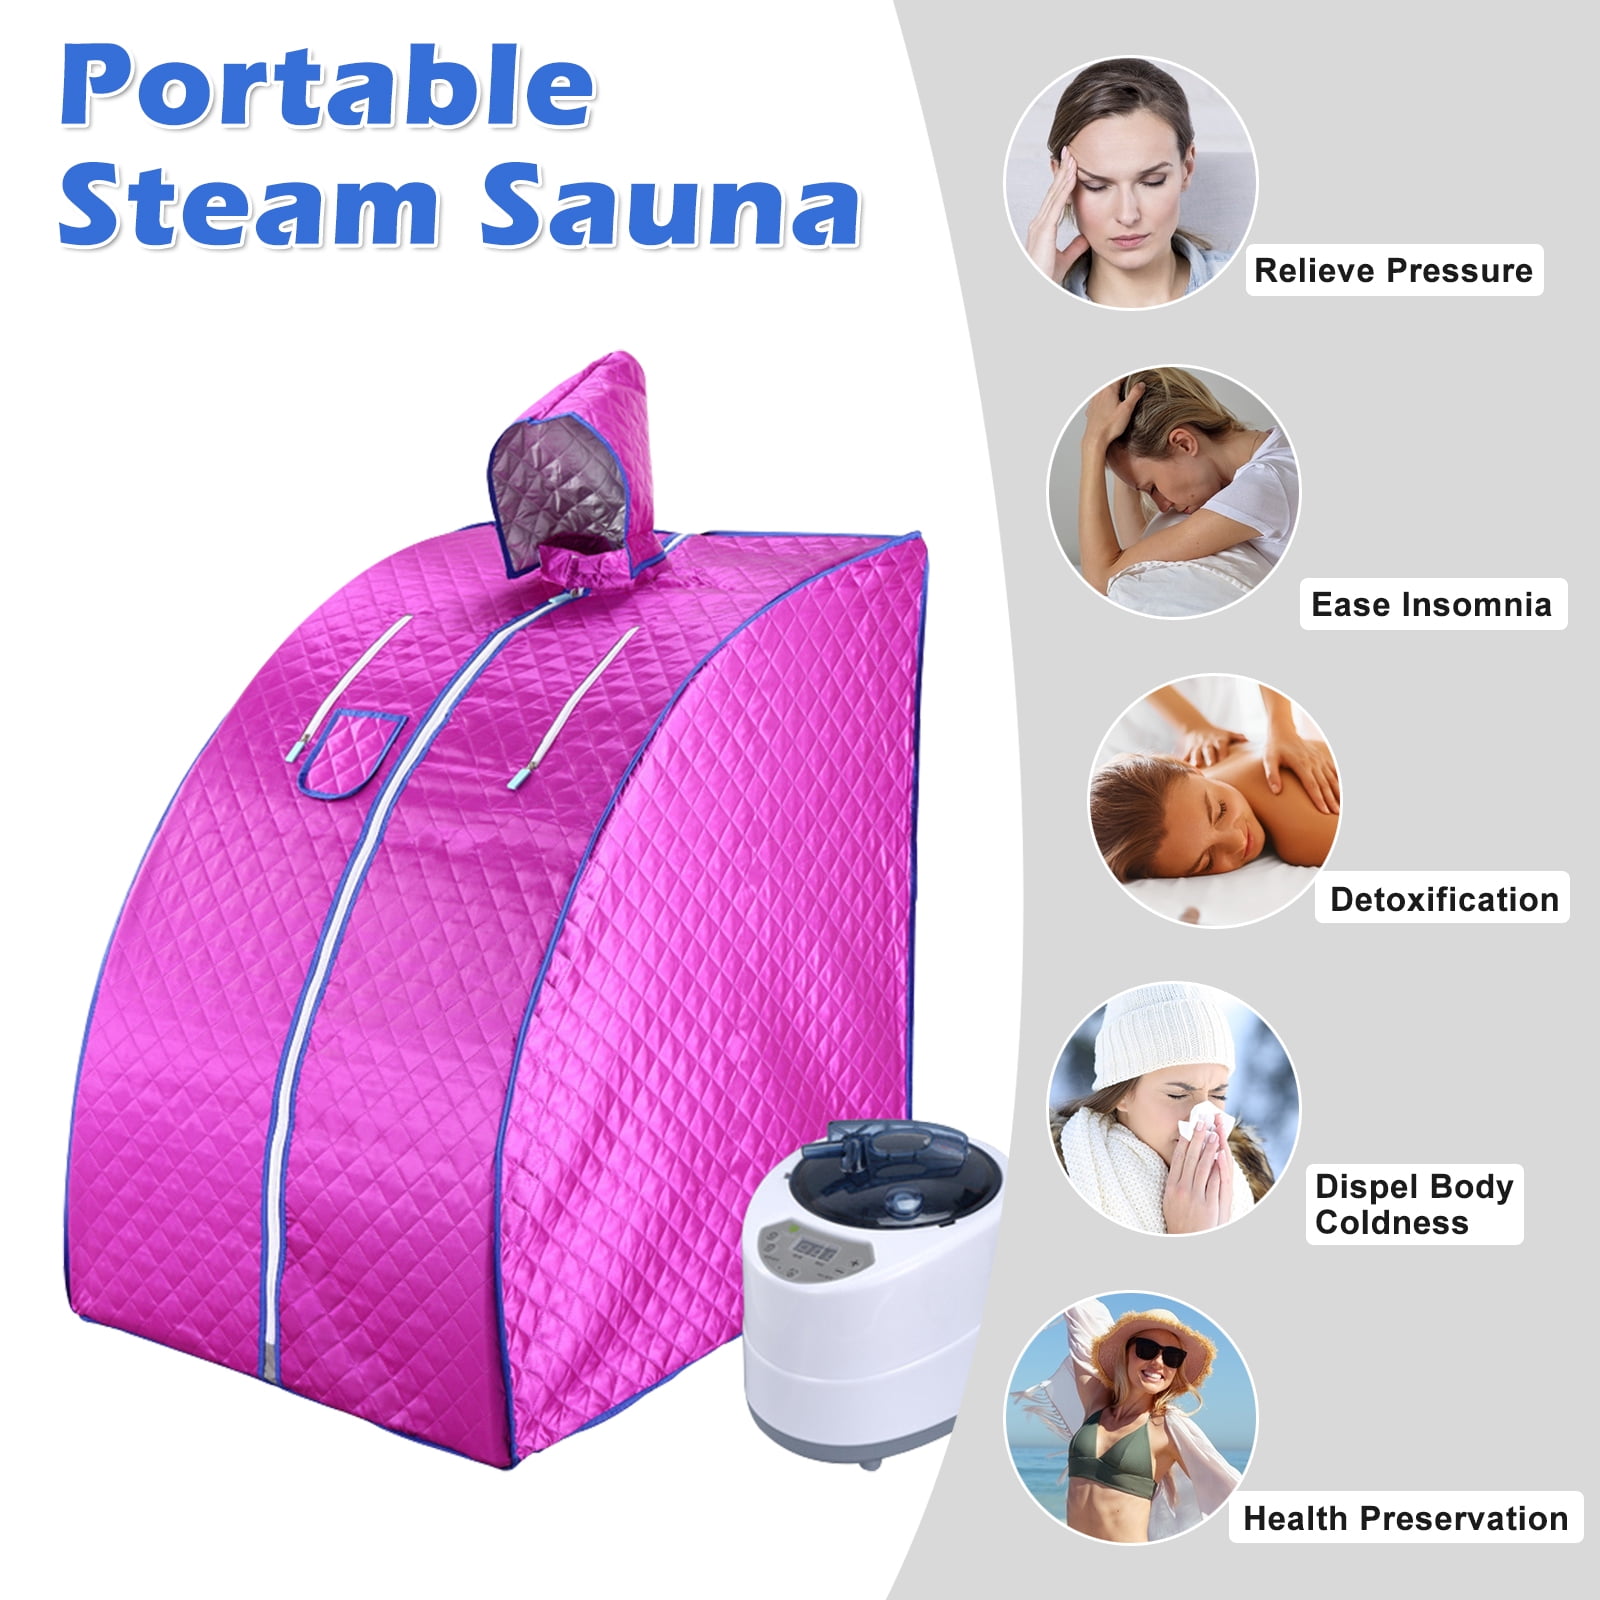 Foldable Home Spa Steam Sauna Tent Full Body Health Preservation Therapy USA 